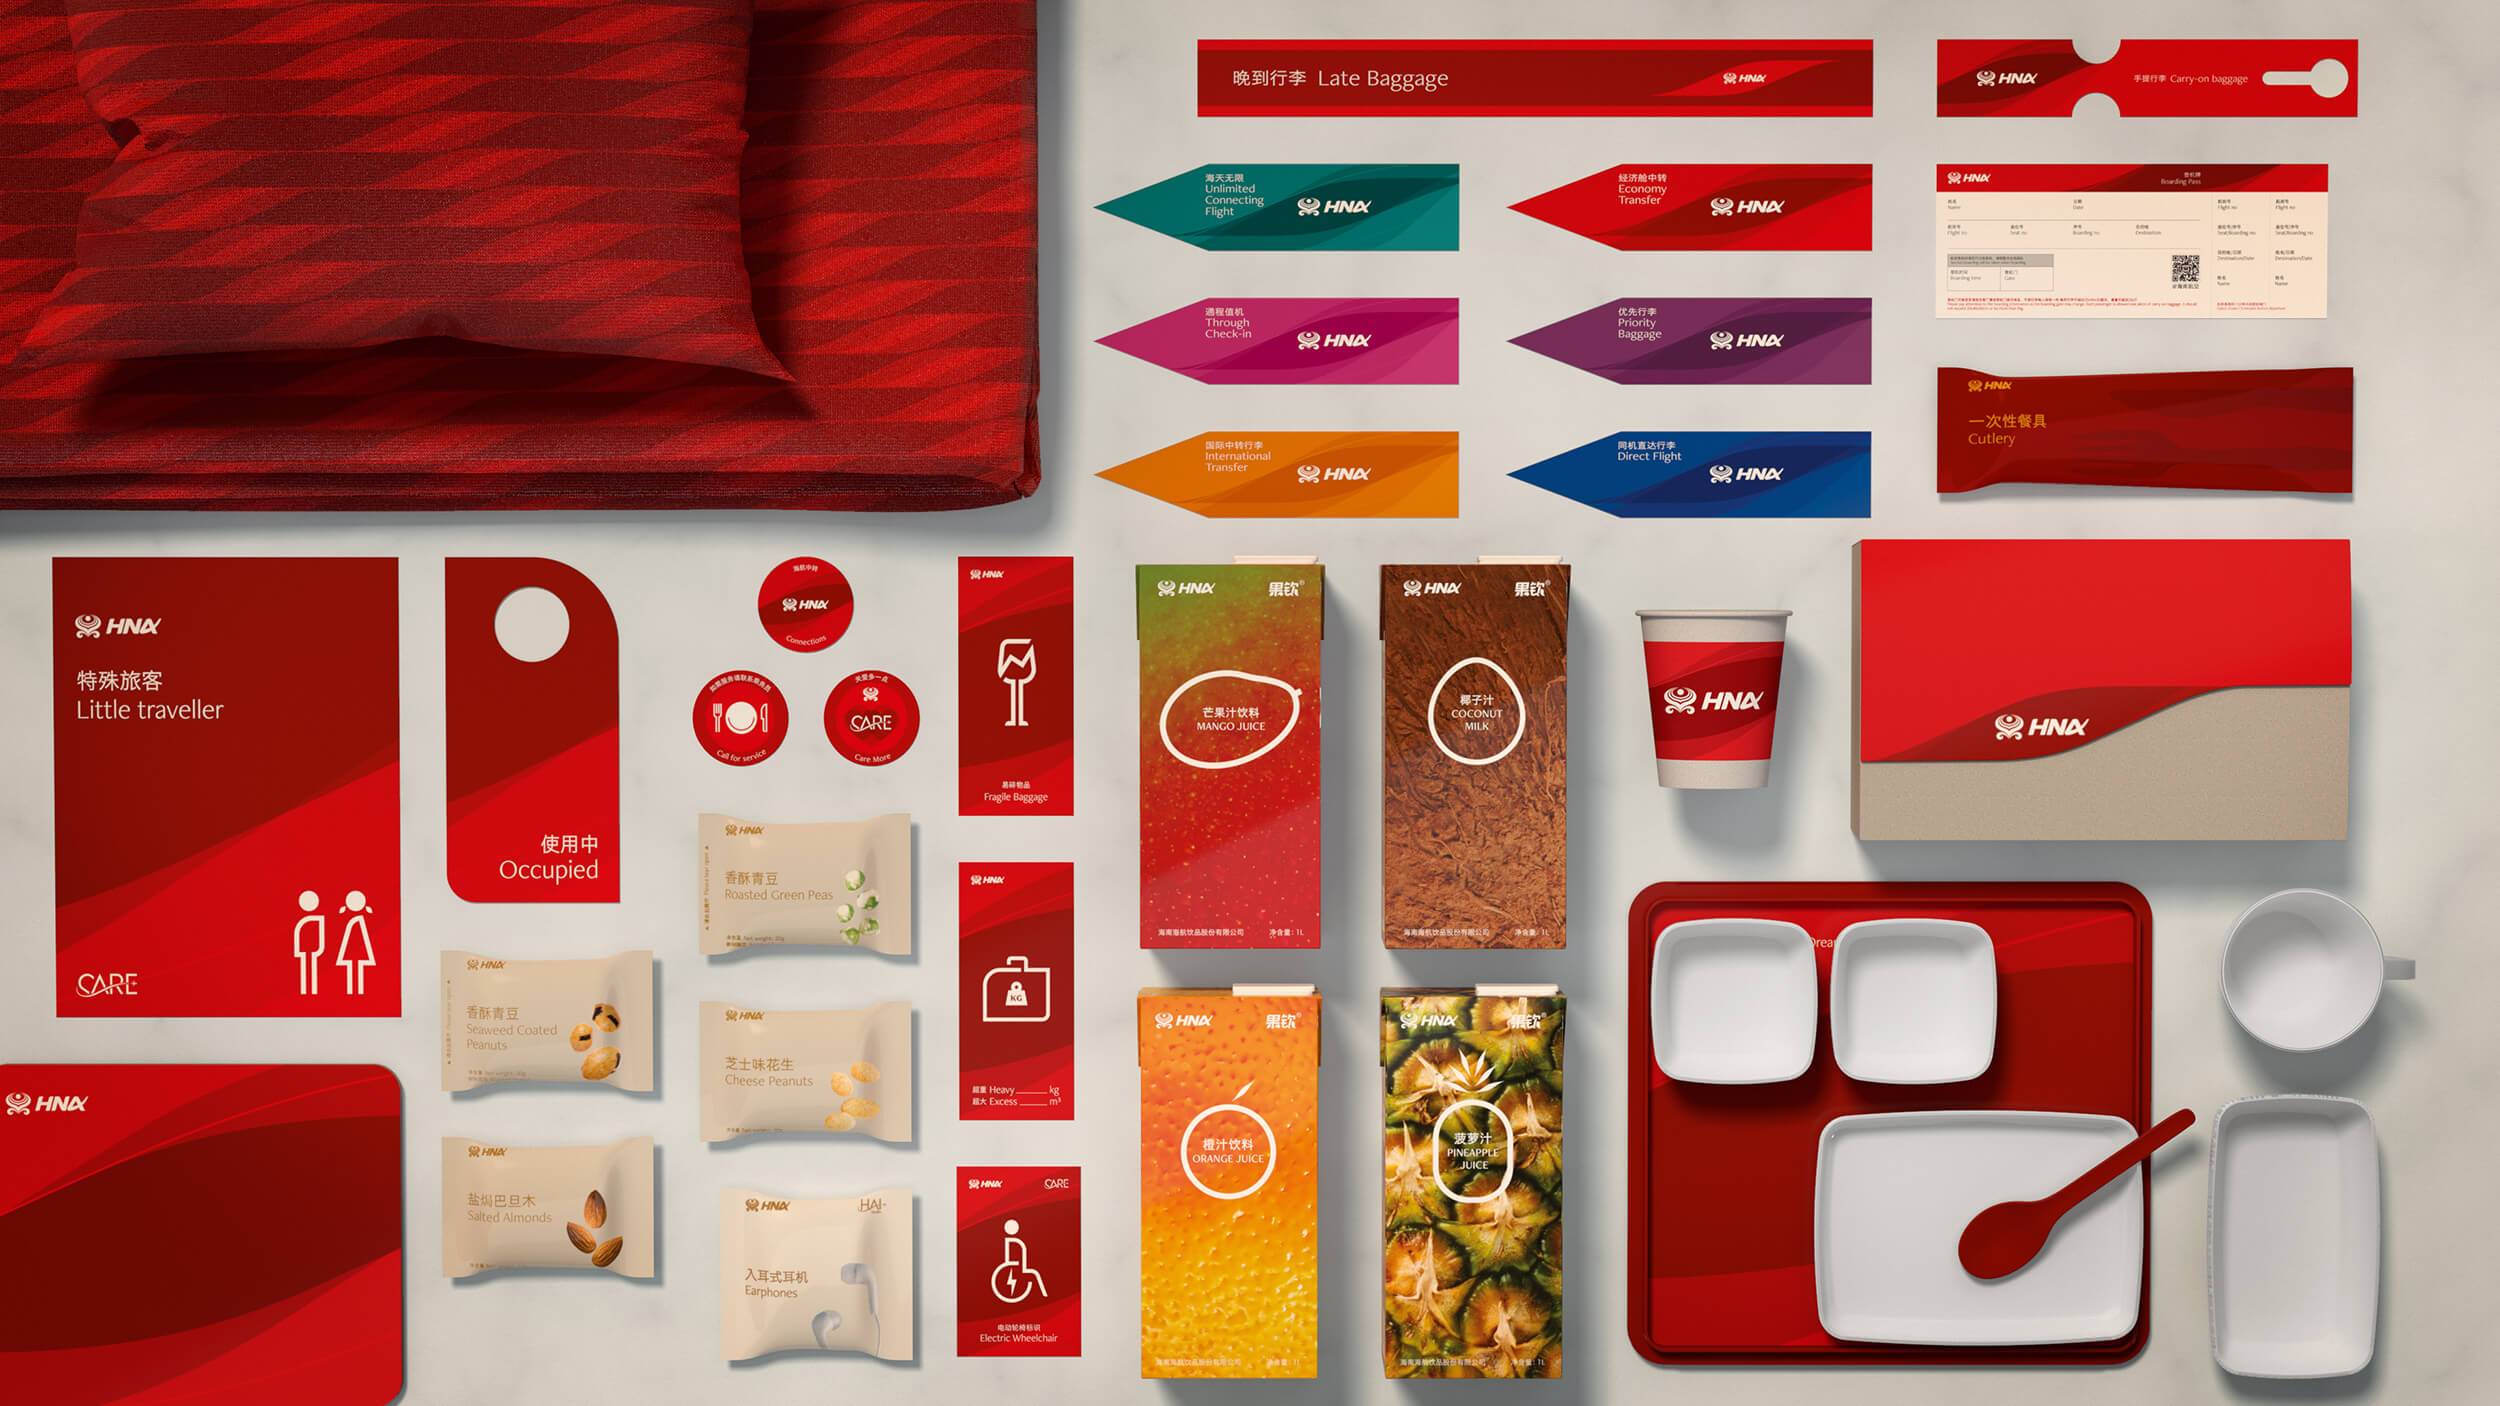 A neatly arranged selection of graphic items, service items and meal items showcasing the HNA brand on a light grey background